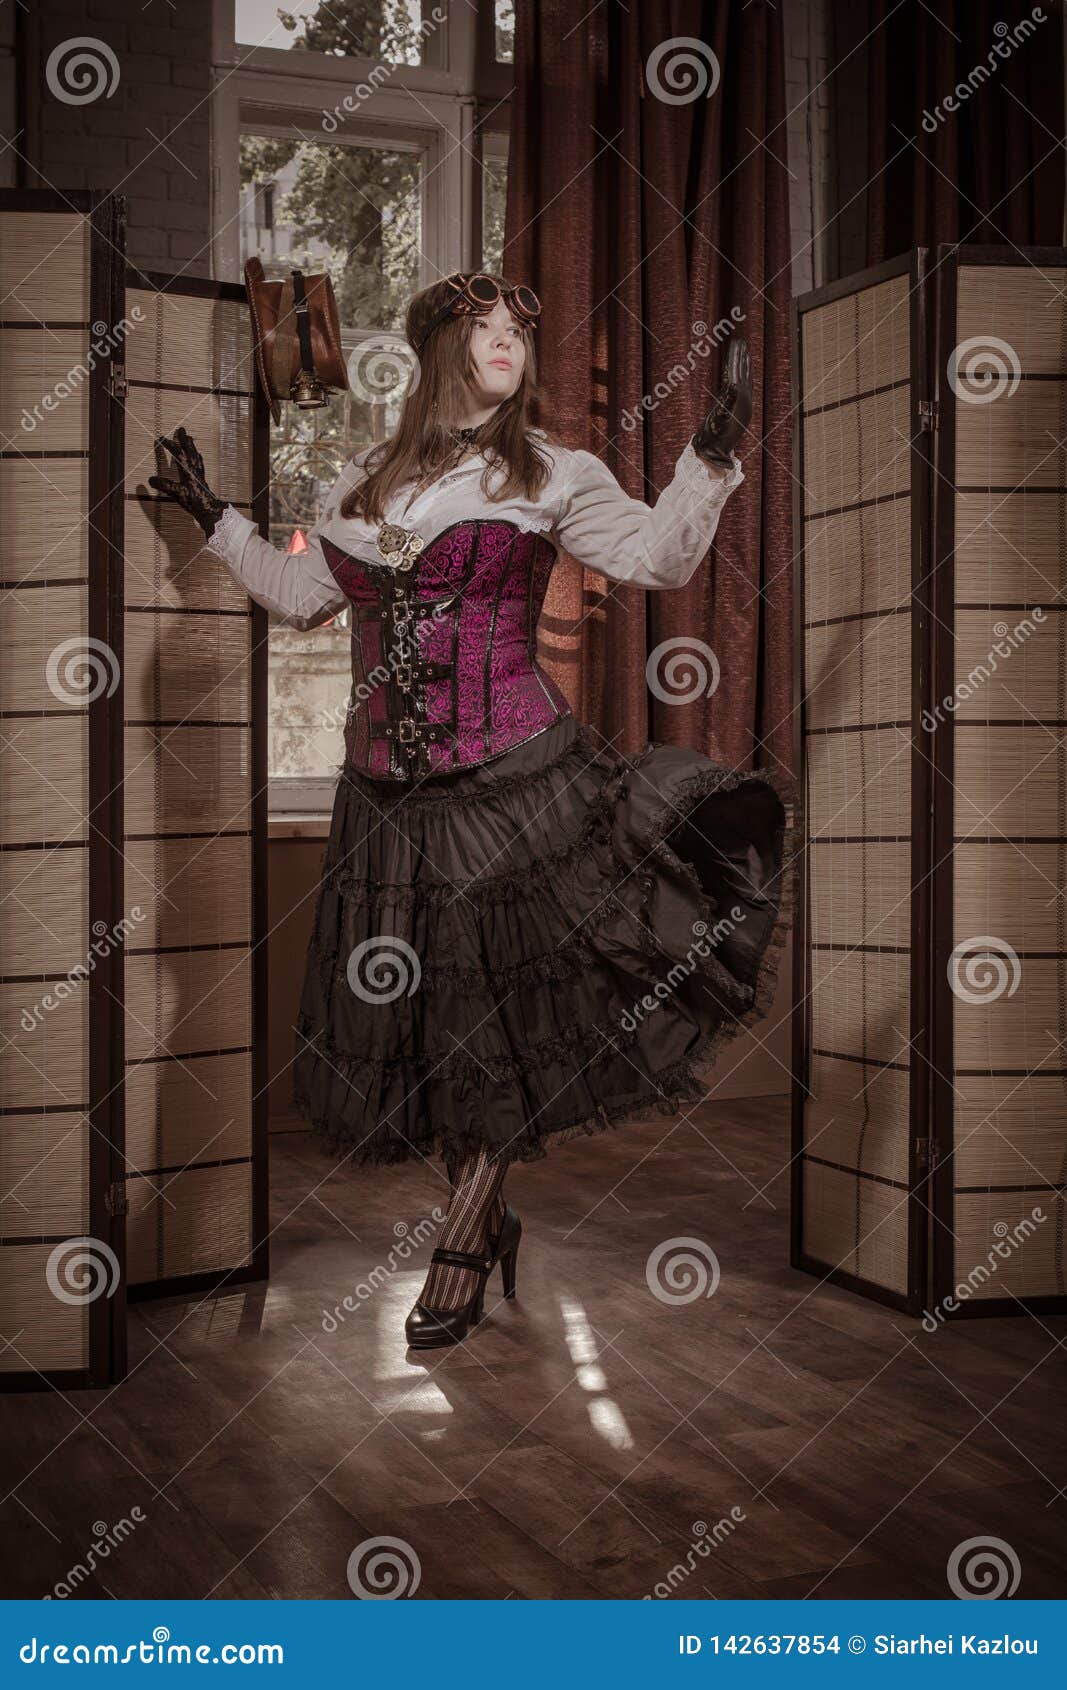 Girl in Costume and Accessories Steampunk Style Stock Photo - Image of ...